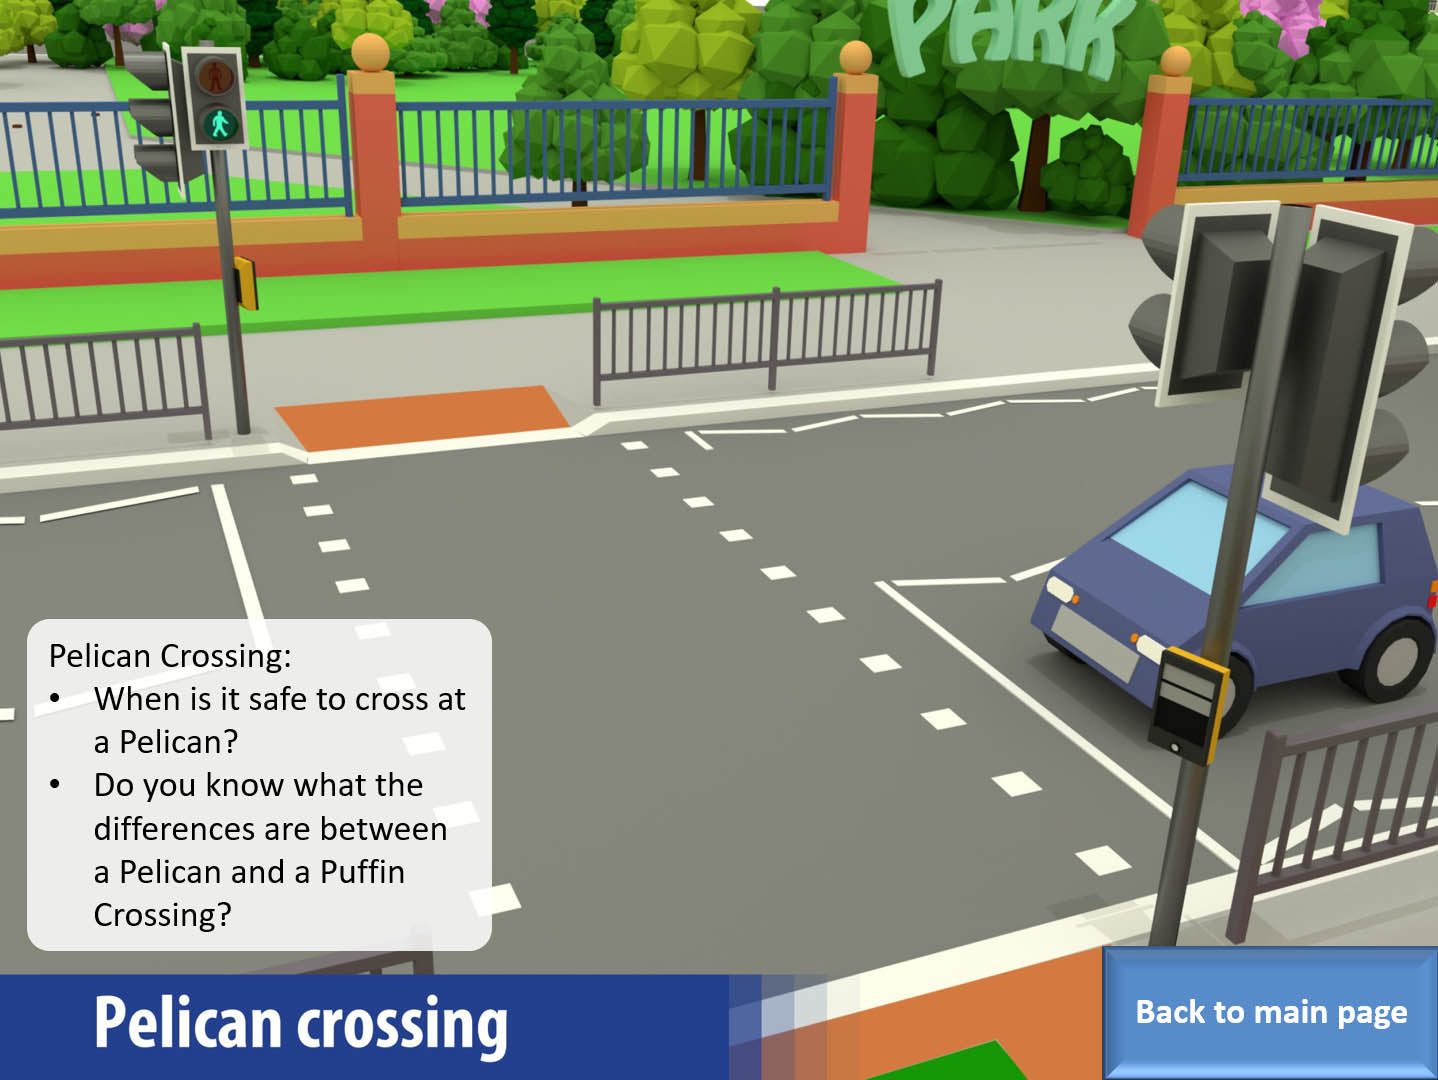 What is traffic calming?